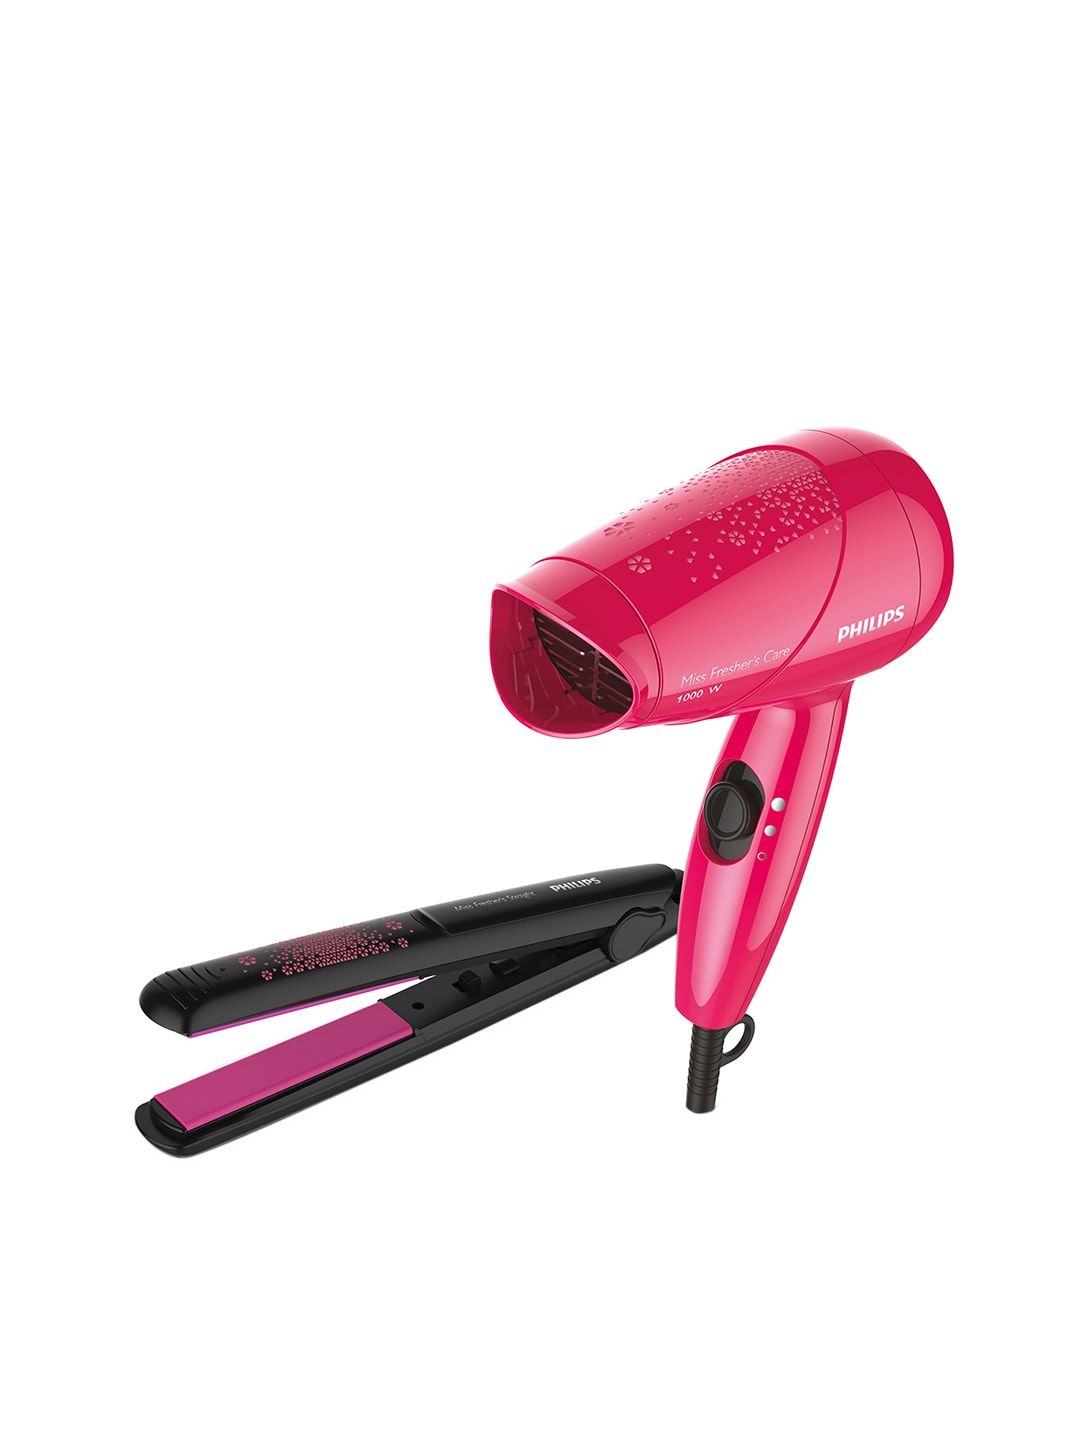 Philips HP8643/46 Miss Fresher's Straightener & Hairdryer Styling Kit Price in India